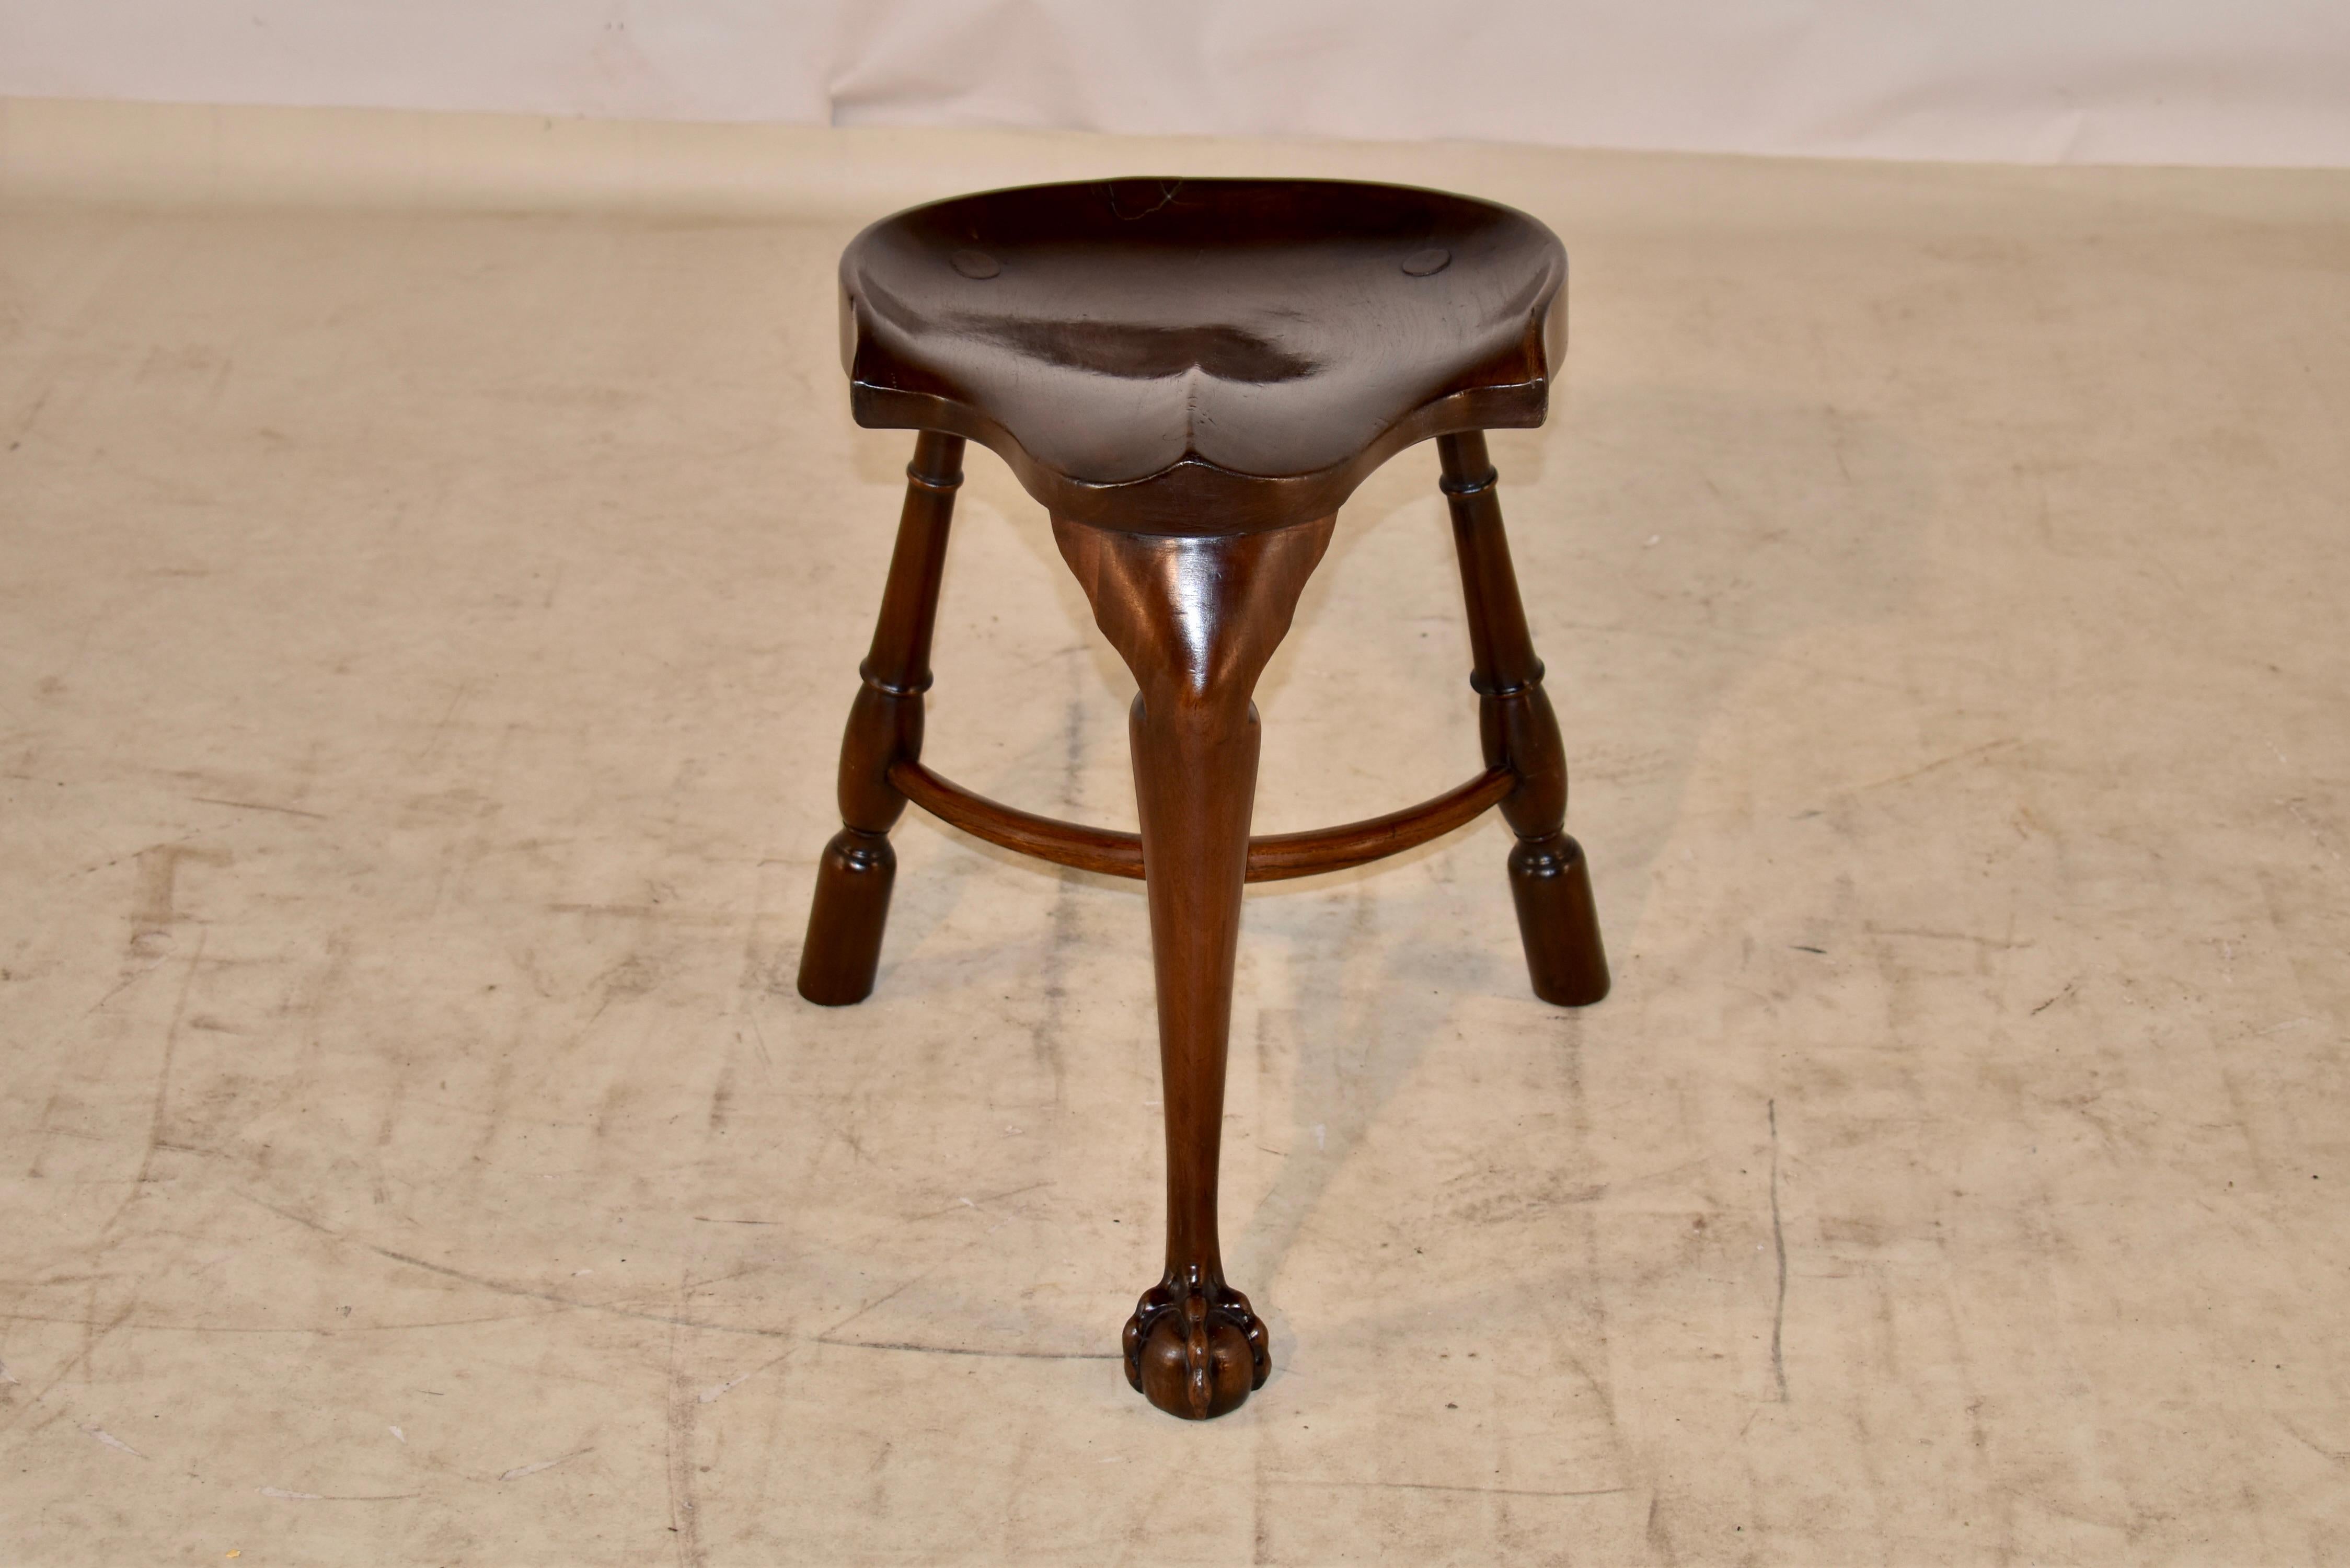 19th century mahogany and elm cock fighting stool from England. The seat is handsomely shaped from elm for comfort and aesthetic appeal. The seat is supported on three mahogany legs, which are splayed and turned in the back and in the front, the leg